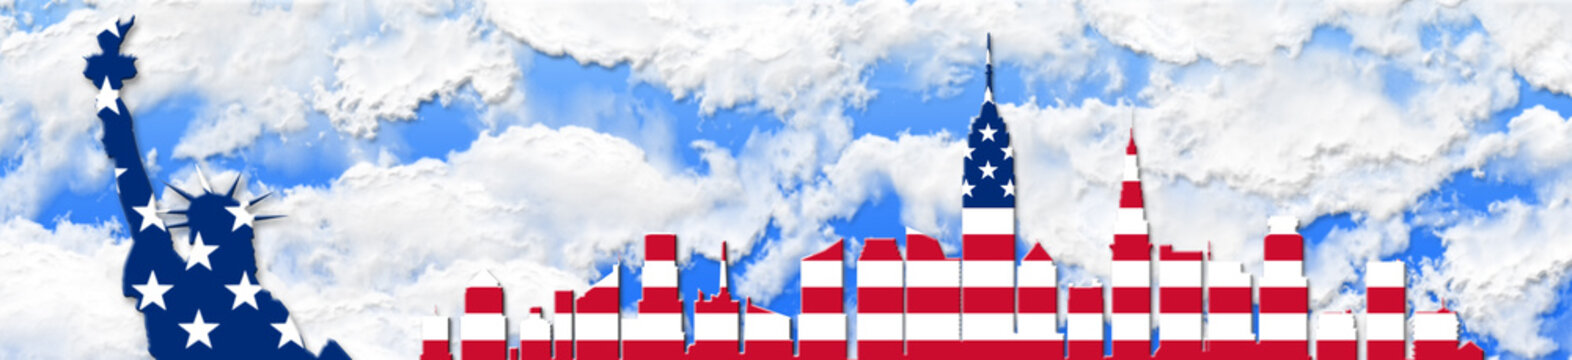 United States Of America. 4th of July, Independence Day Concept. New York City Skyline Against Sky Background 3D illustration